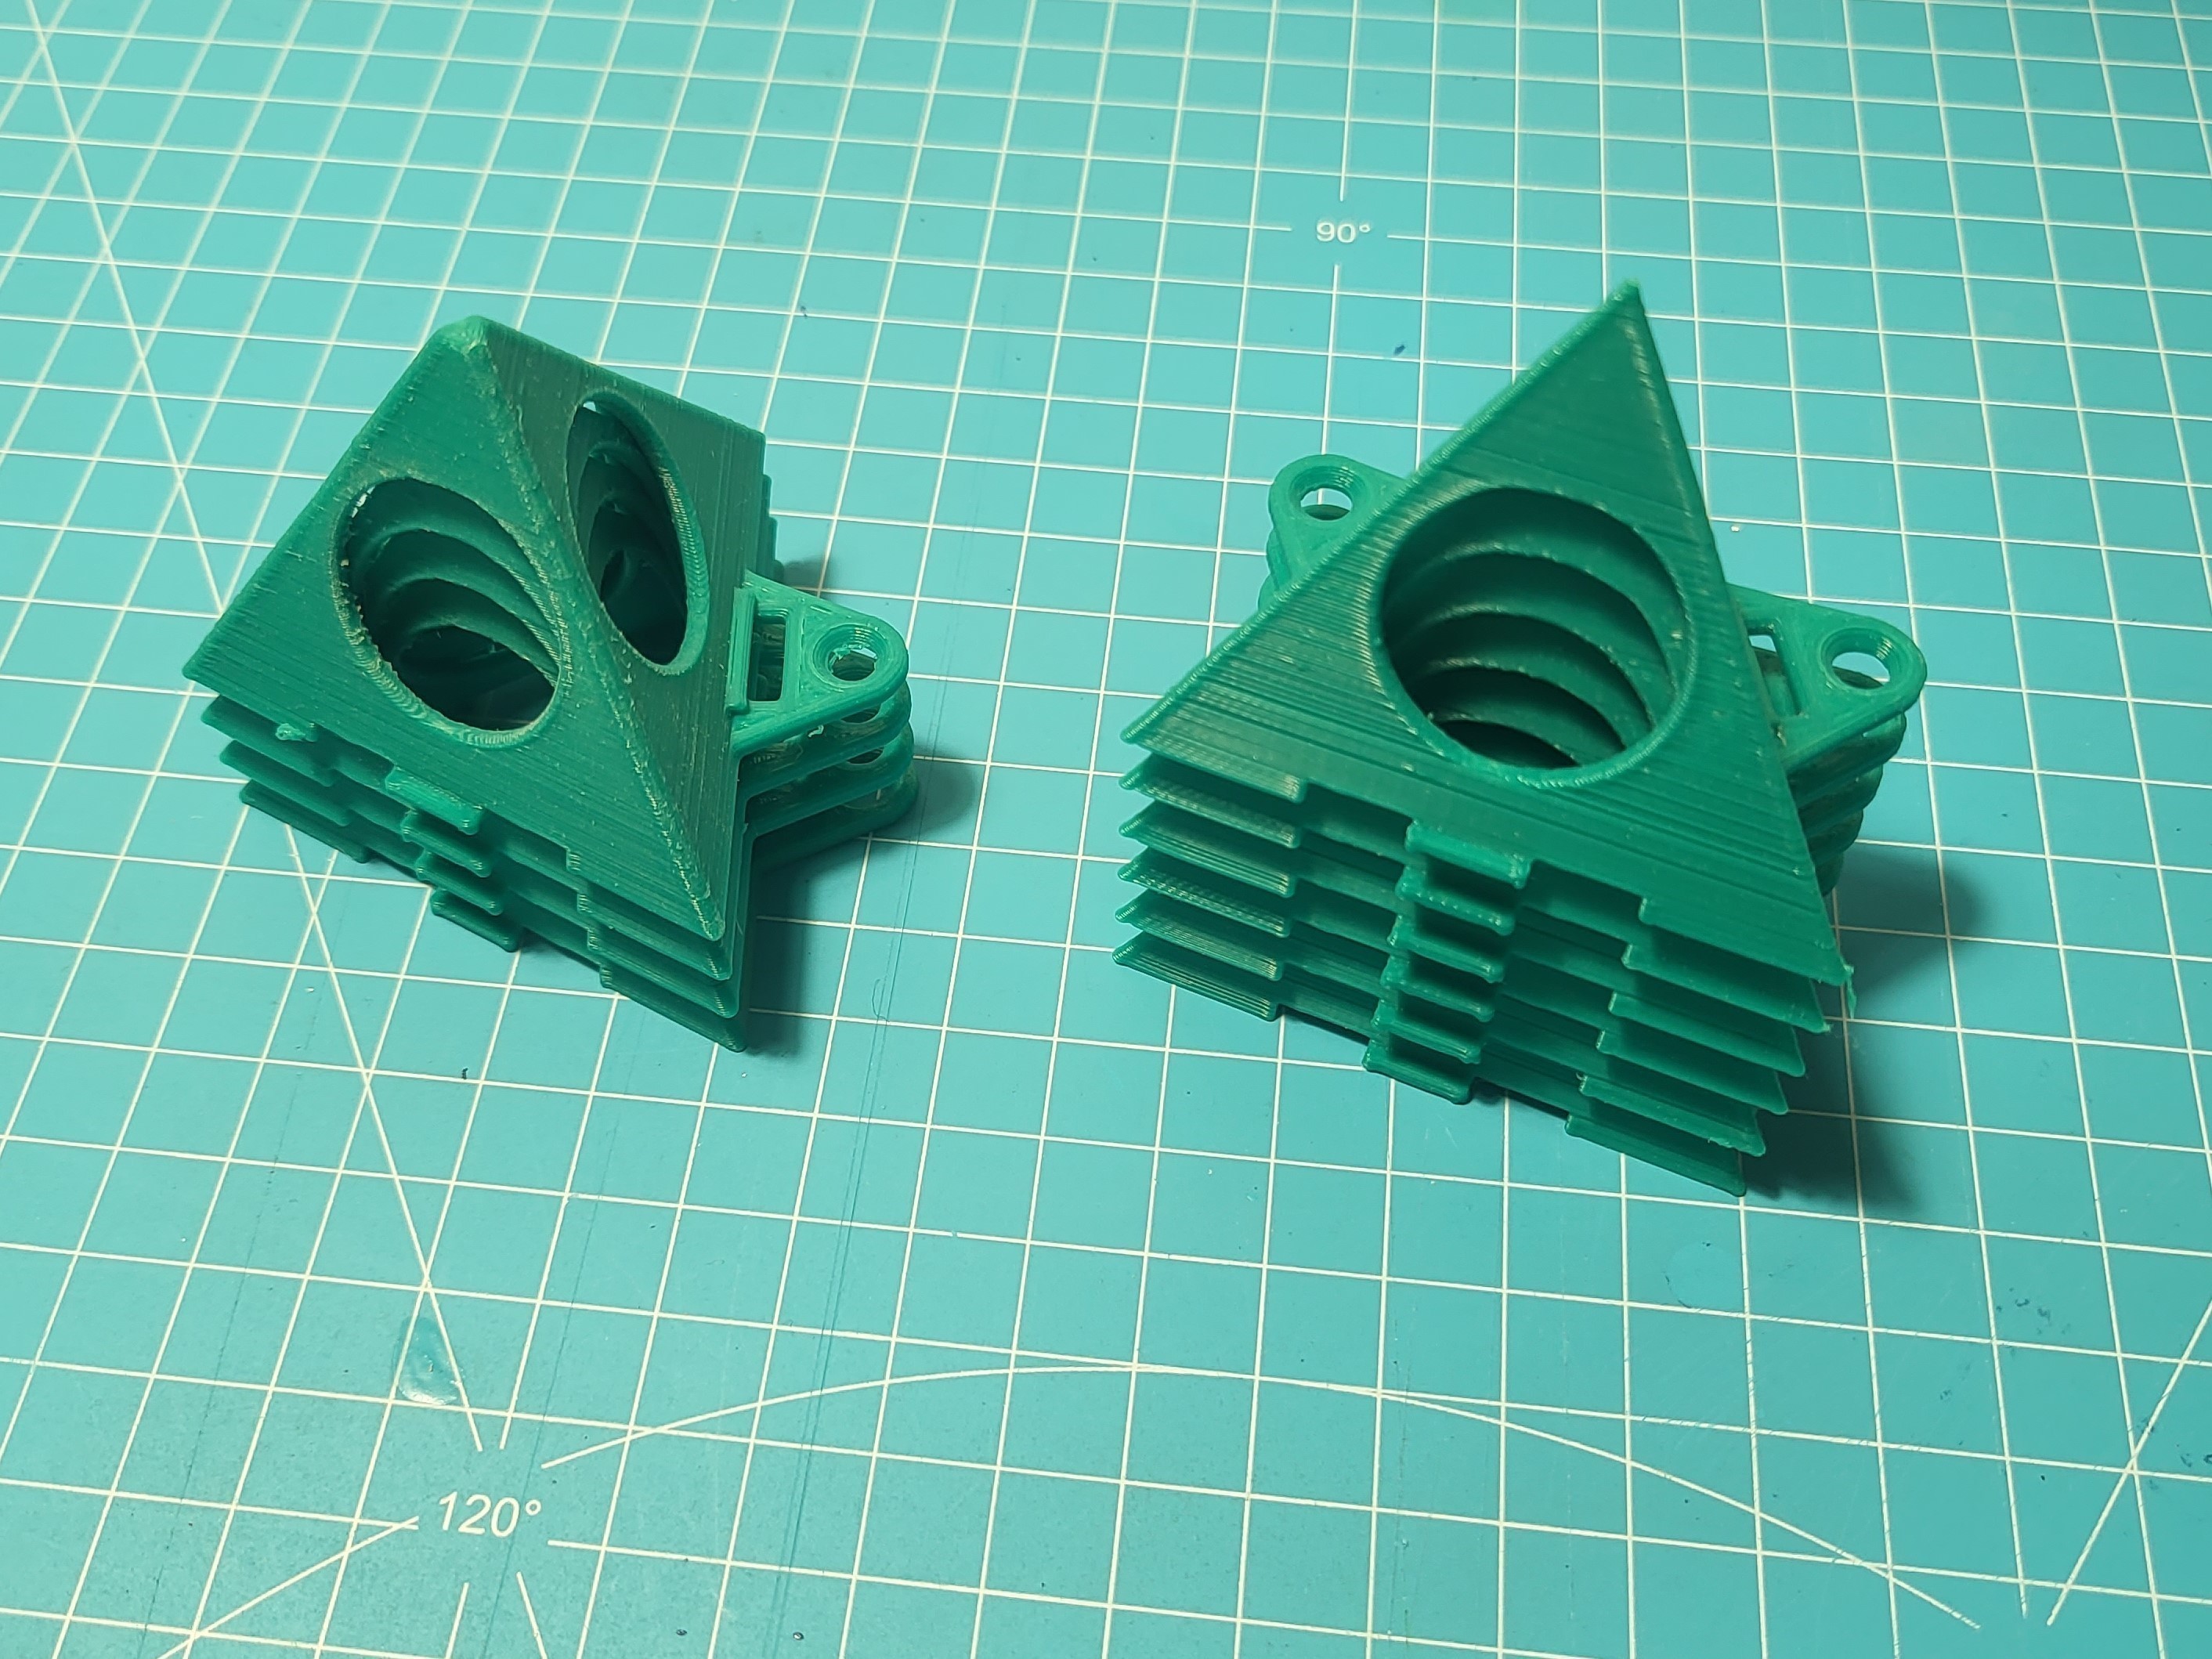 3D Printed Painters Pyramids or Painters Points (Stackable) by